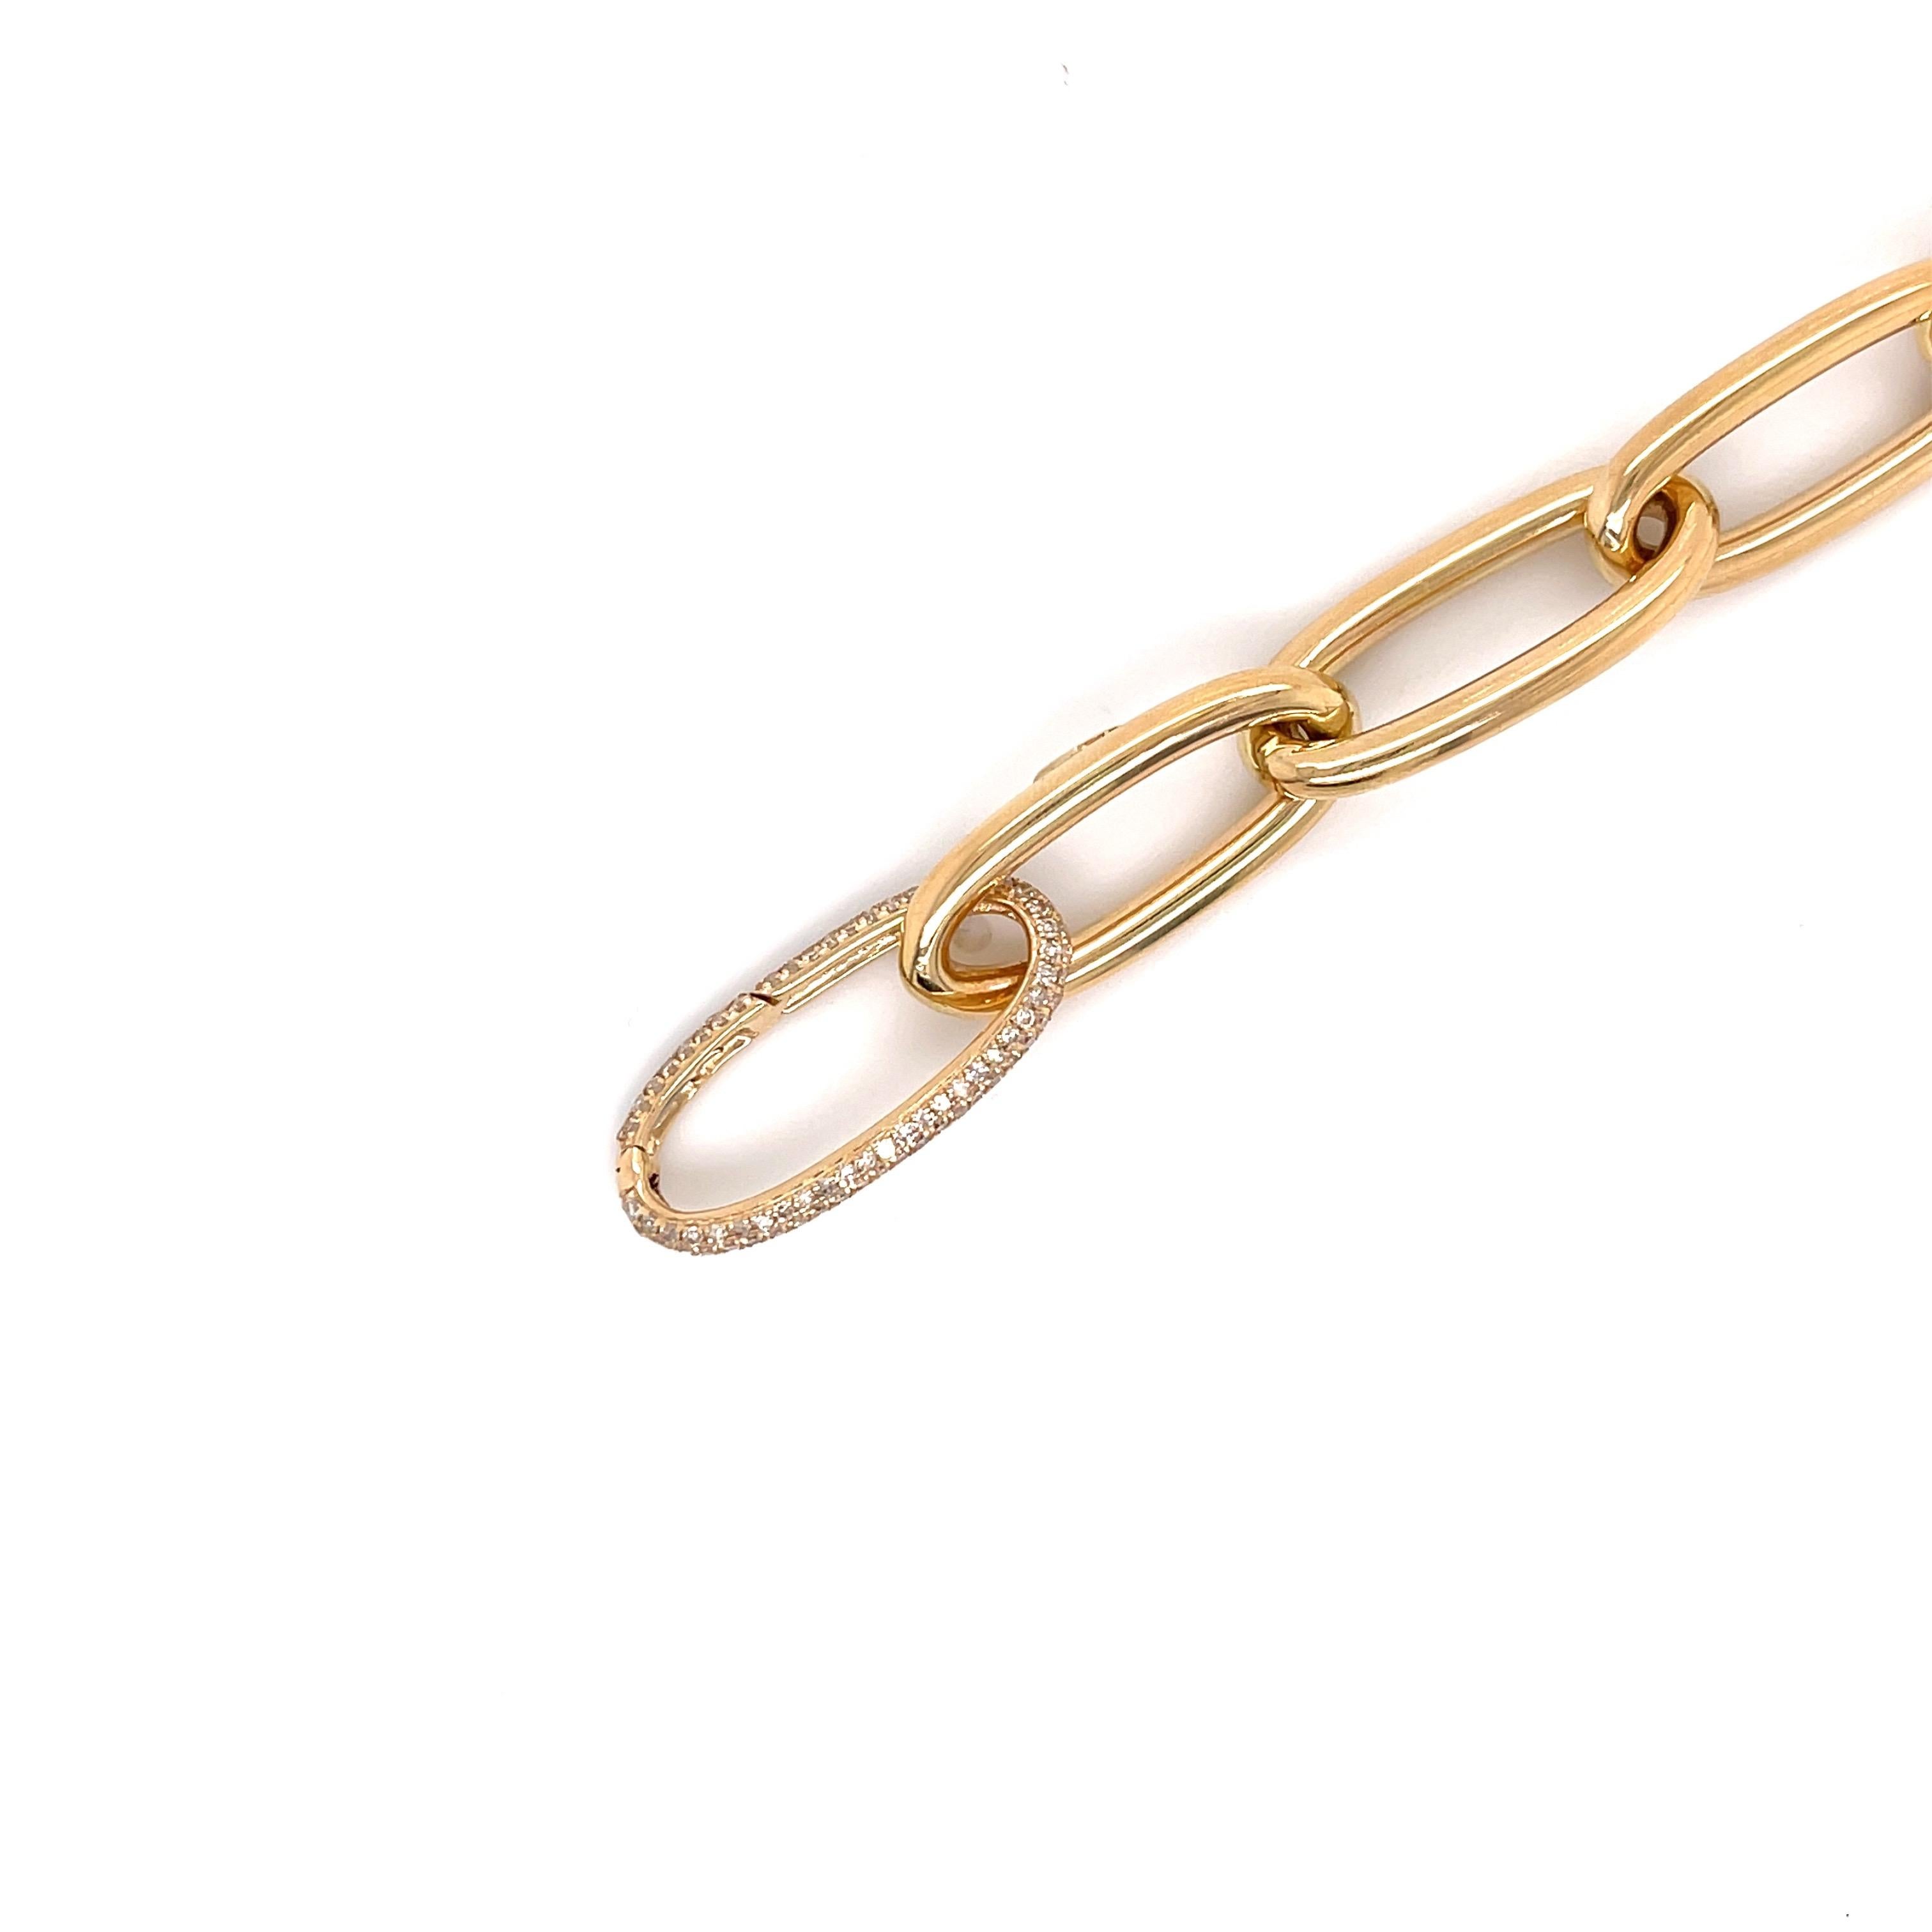 Round Cut Oval 14 Karat Yellow Gold Link Chain Bracelet with Diamond Link  For Sale